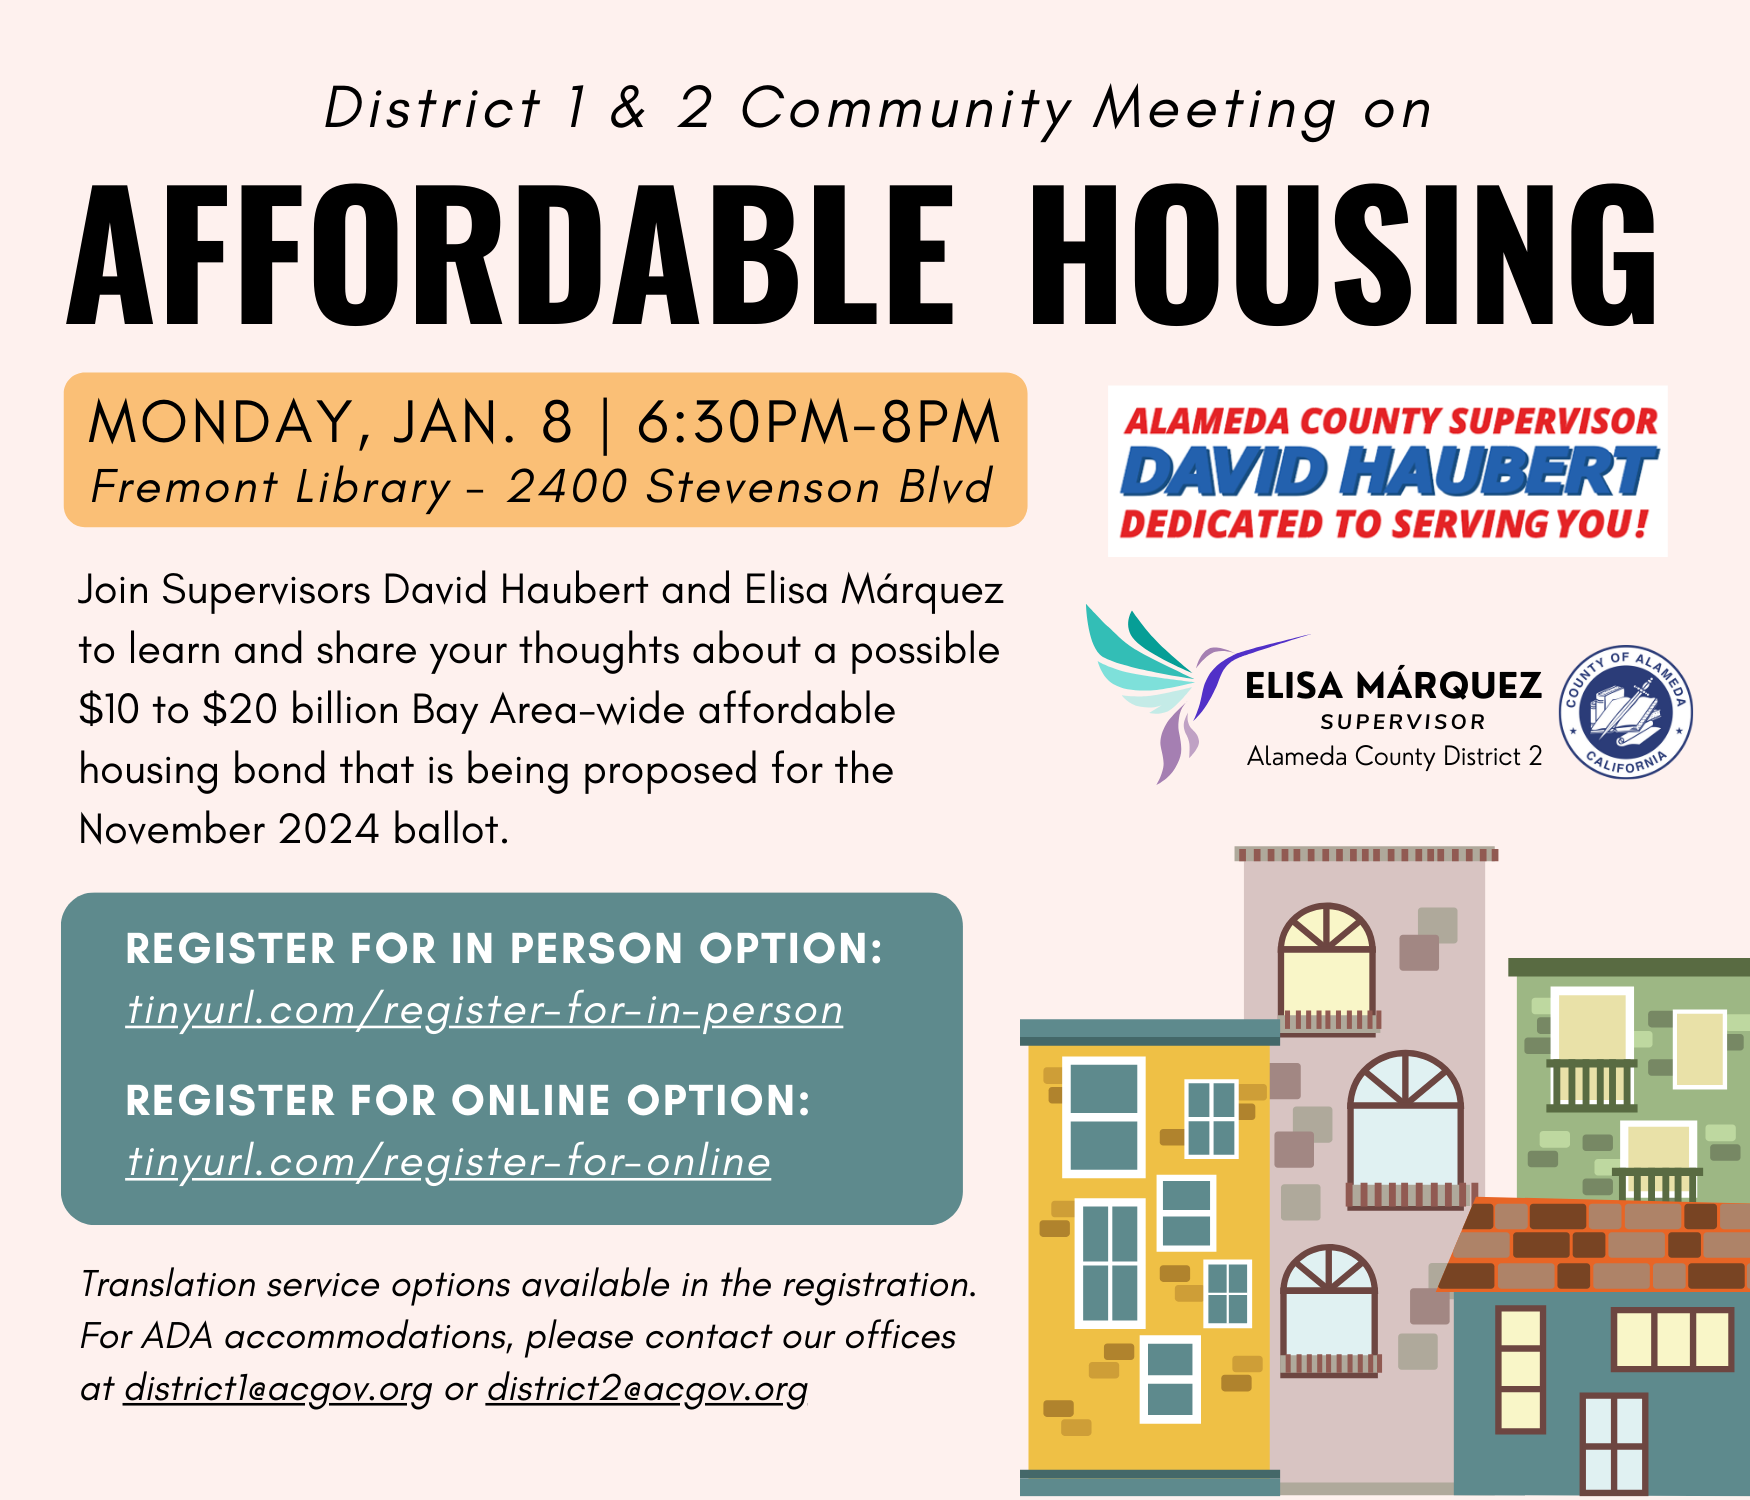 1/8 Affordable Housing Community Meeting Flyer